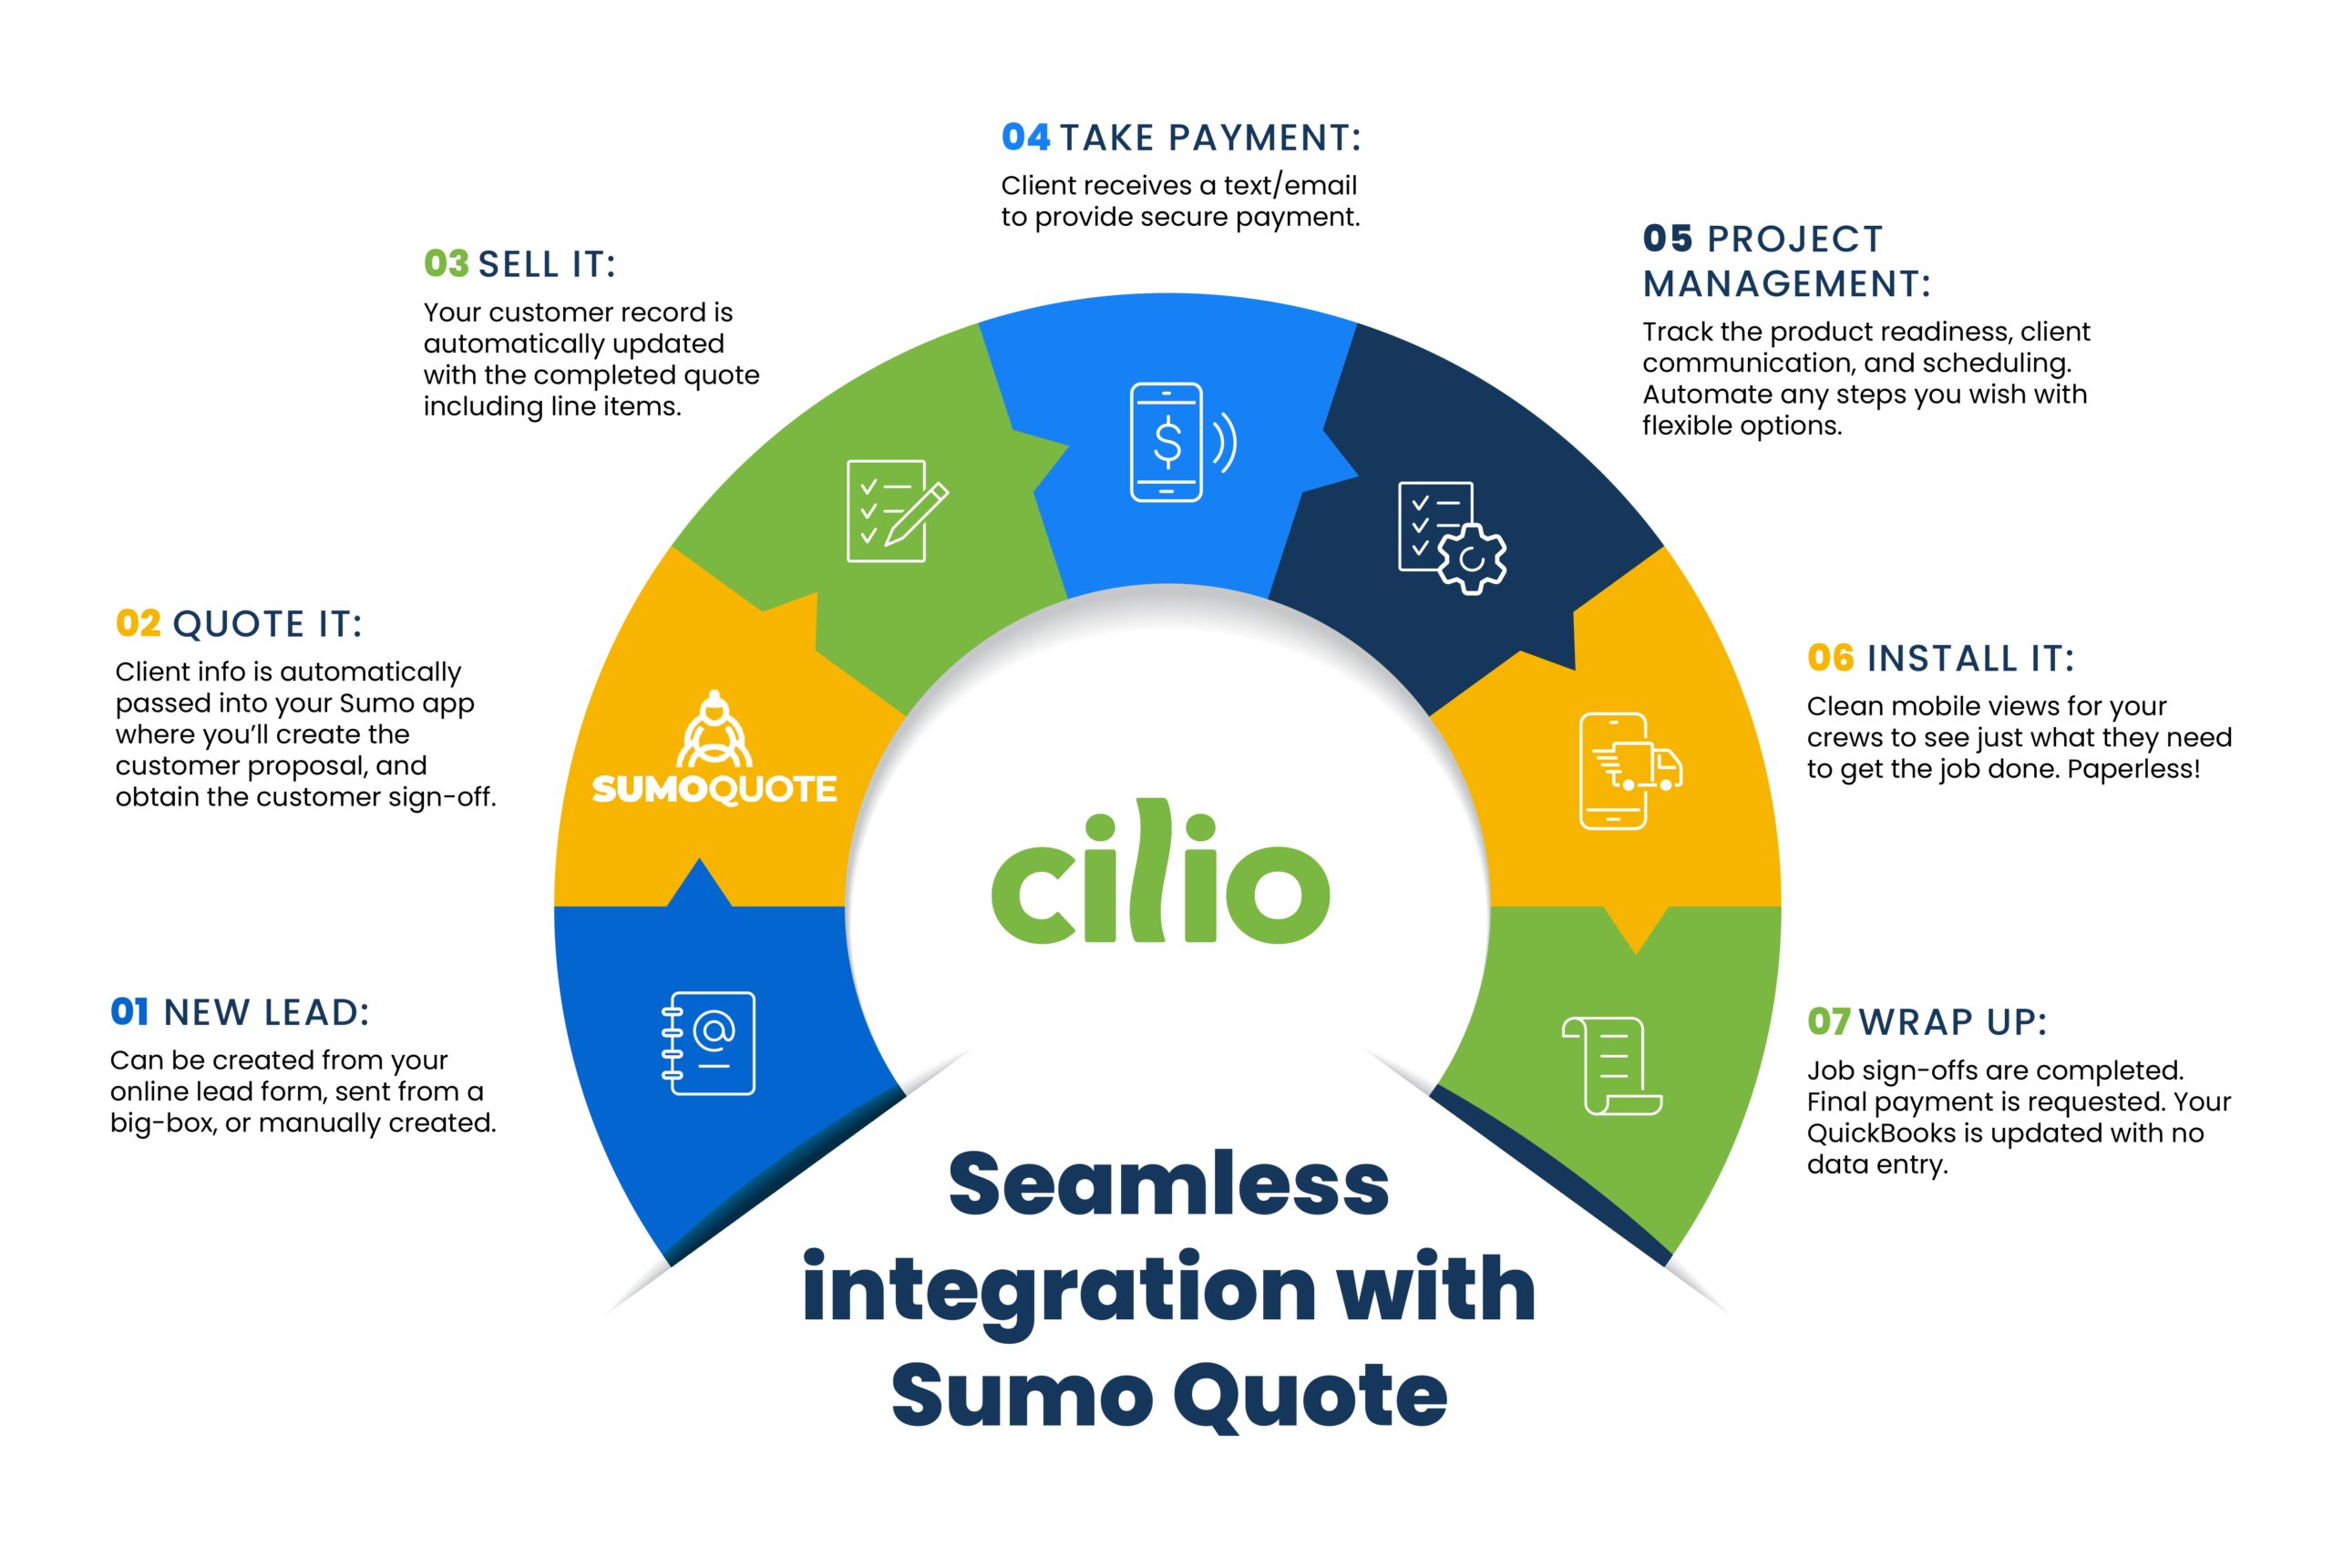 Cilio's seamless integration with Sumo Quote. Step by step process.